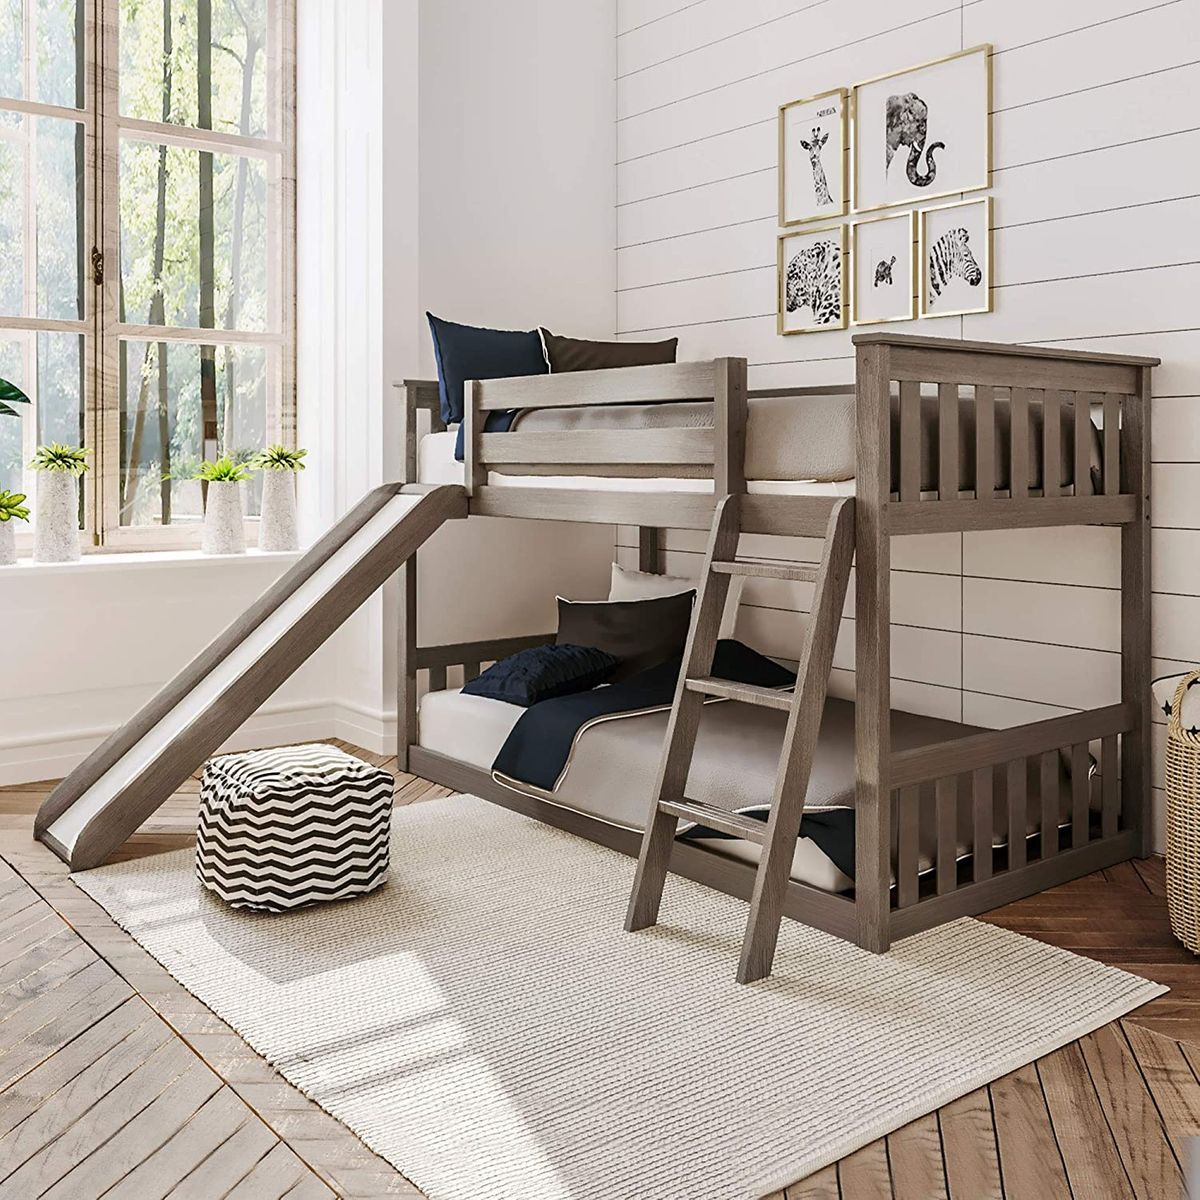 8 Best Bunk Beds 2020 The Strategist, Bunk Beds With